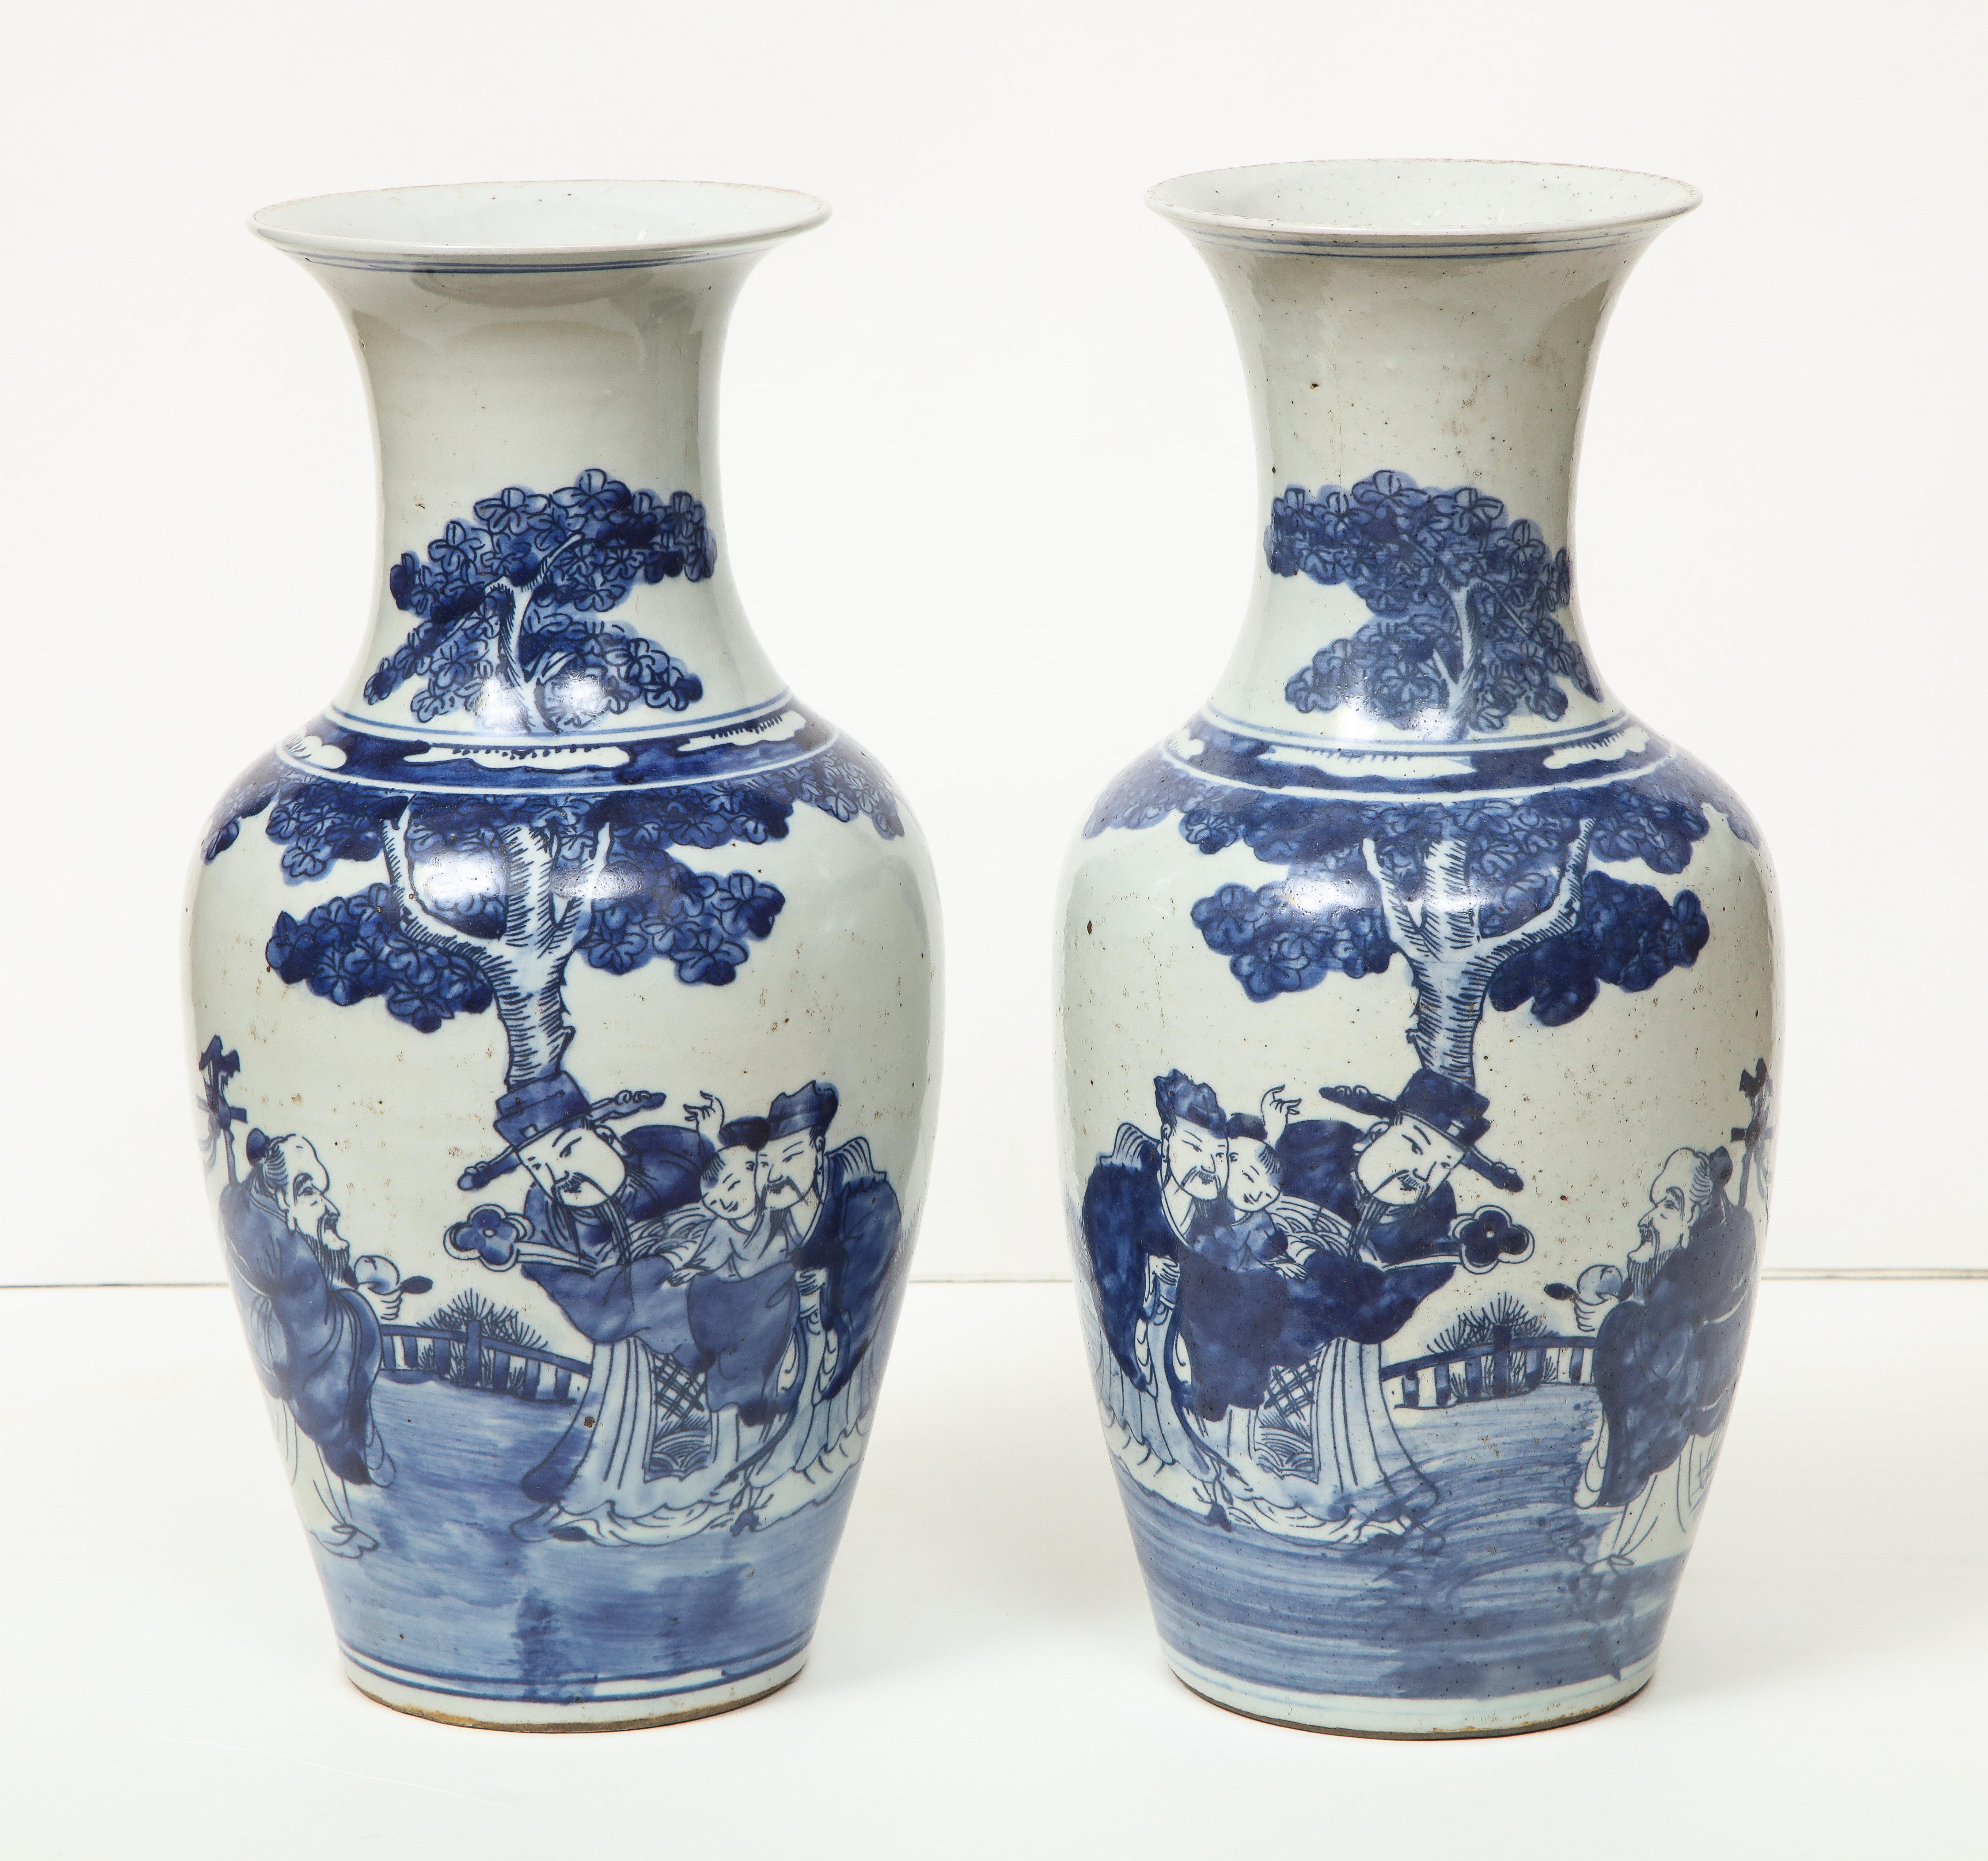 20th Century Pair of Chinese Export Vases